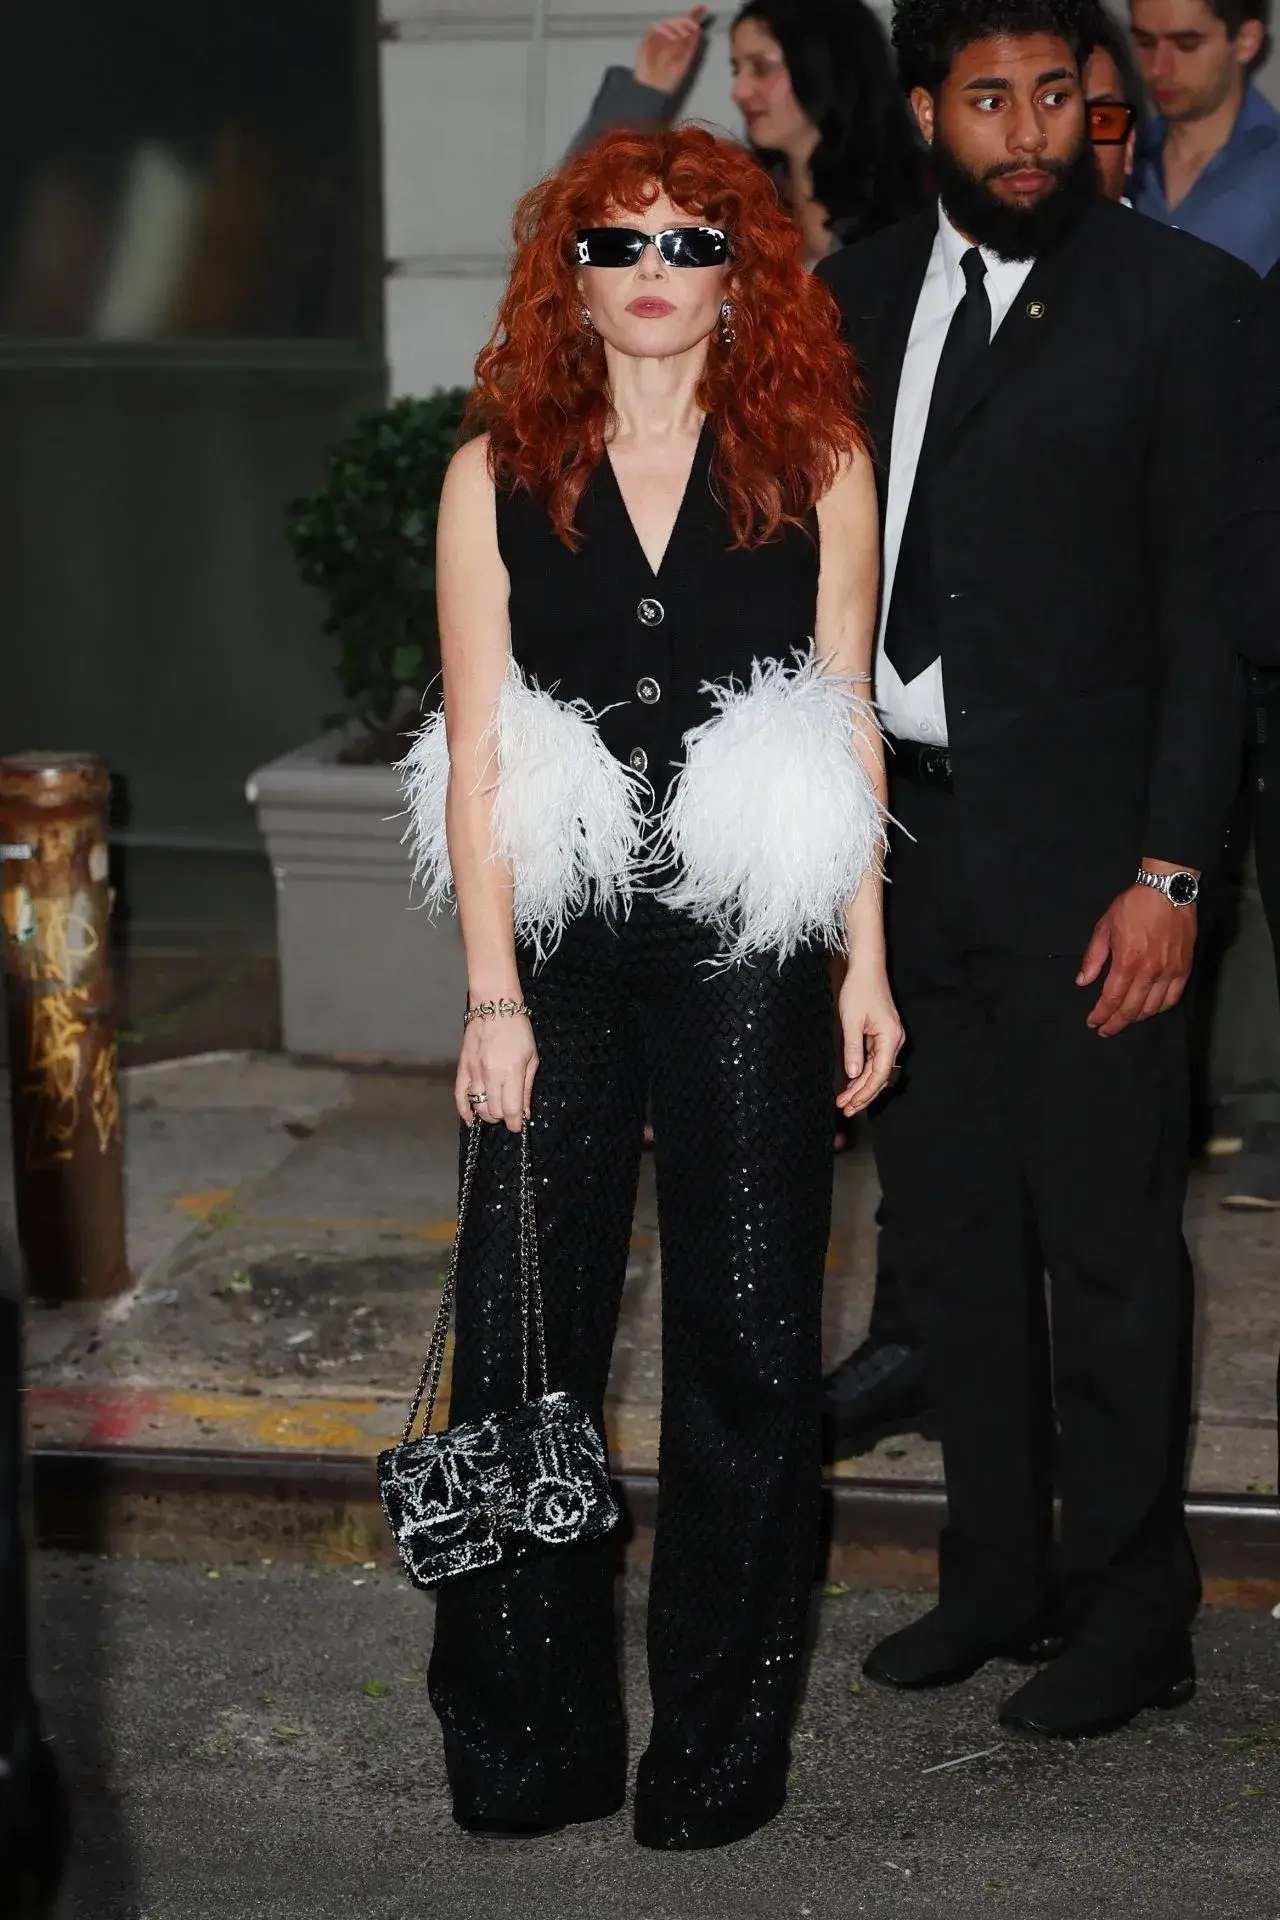 NATASHA LYONNE AT THE CHANEL TRIBECA FESTIVAL ARTISTS DINNER AT THE ODEON IN NEW YORK 1